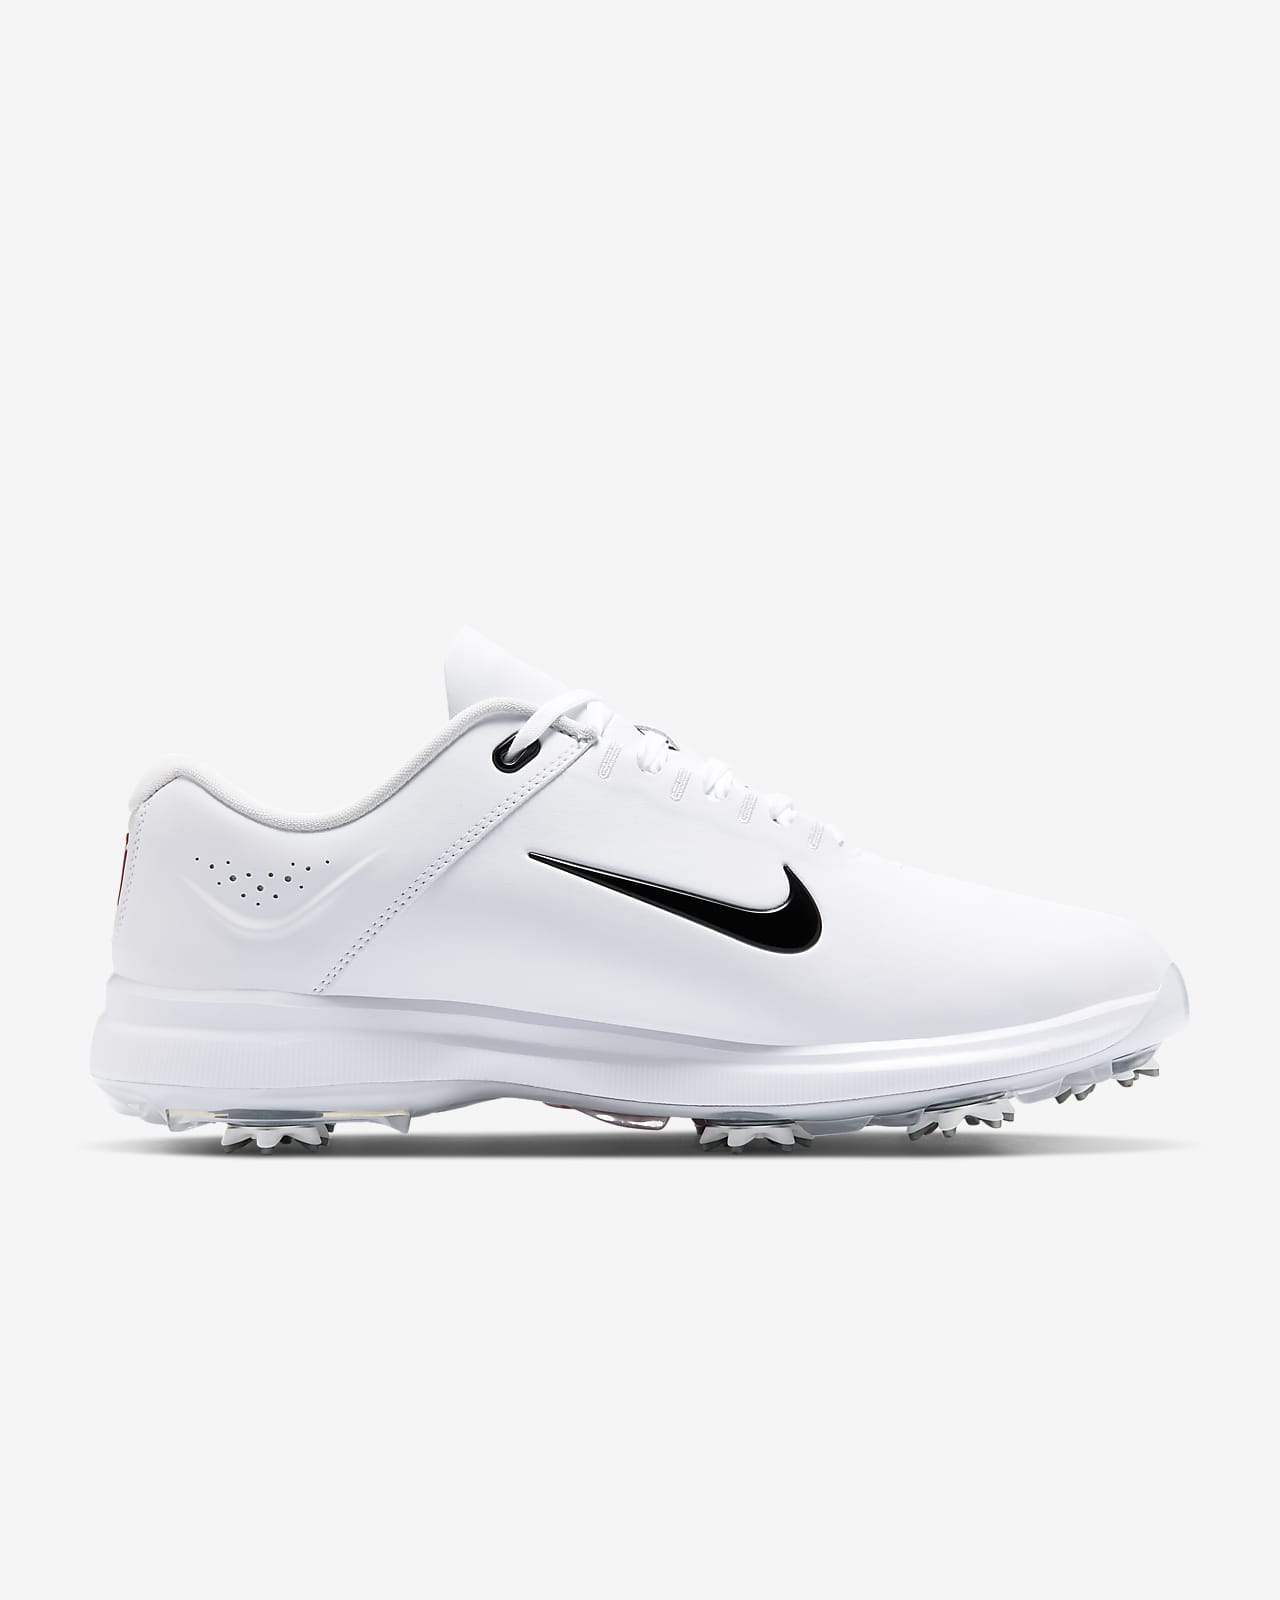 wide nike golf shoes